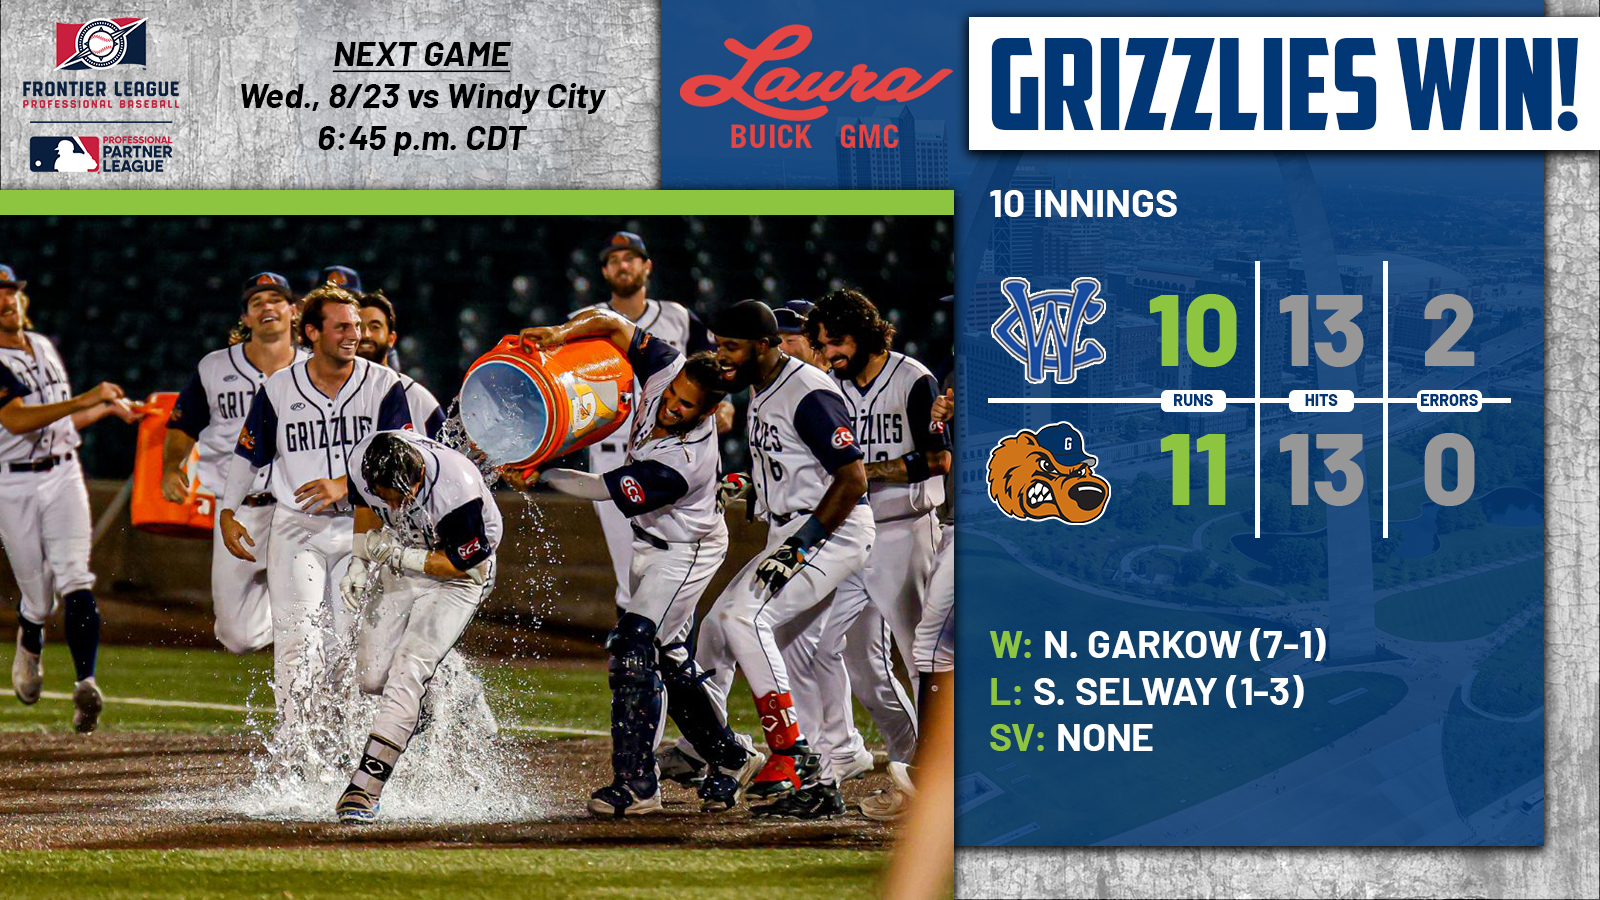 GRIZZLIES WALK OFF WINDY CITY IN CLASSIC